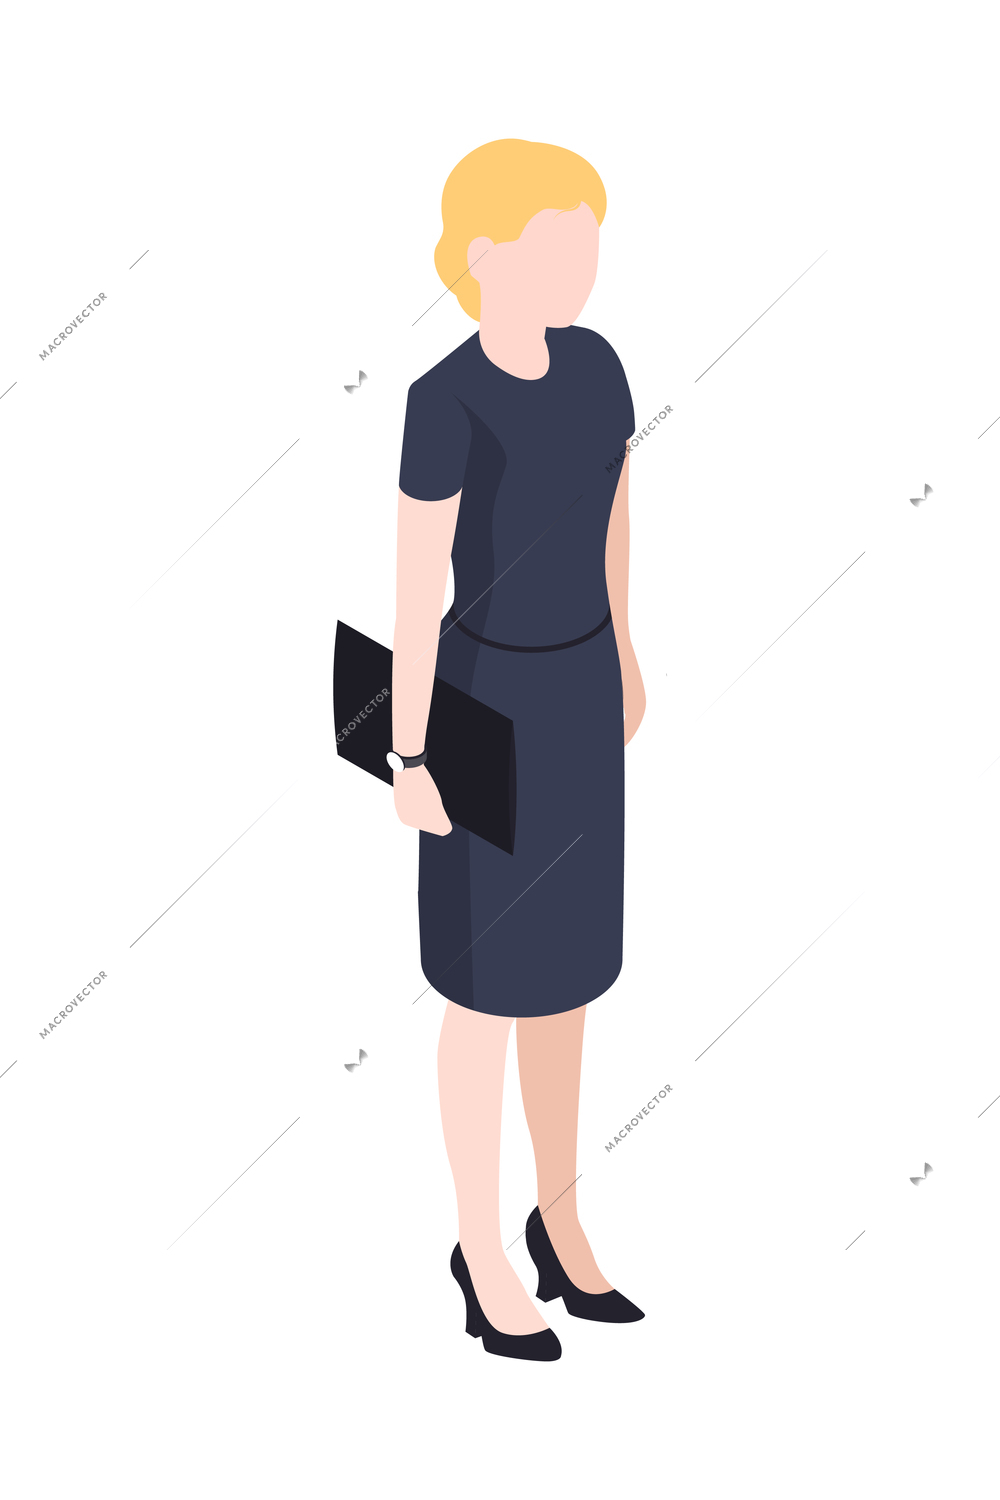 Isometric icon with faceless character of businesswoman wearing dress vector illustration